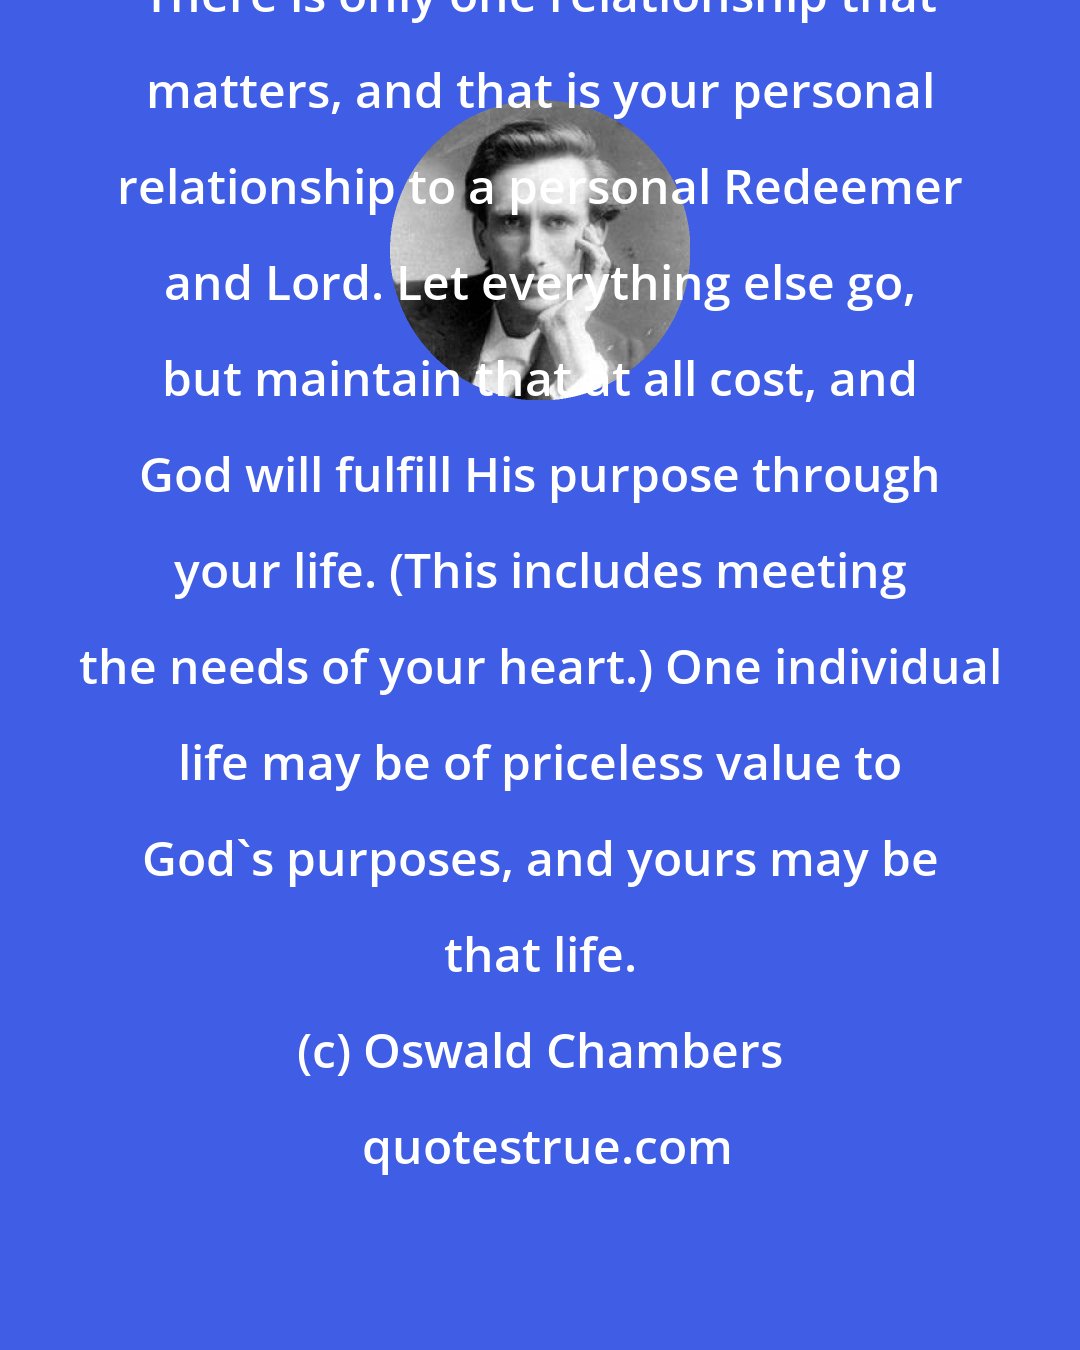 Oswald Chambers: There is only one relationship that matters, and that is your personal relationship to a personal Redeemer and Lord. Let everything else go, but maintain that at all cost, and God will fulfill His purpose through your life. (This includes meeting the needs of your heart.) One individual life may be of priceless value to God's purposes, and yours may be that life.